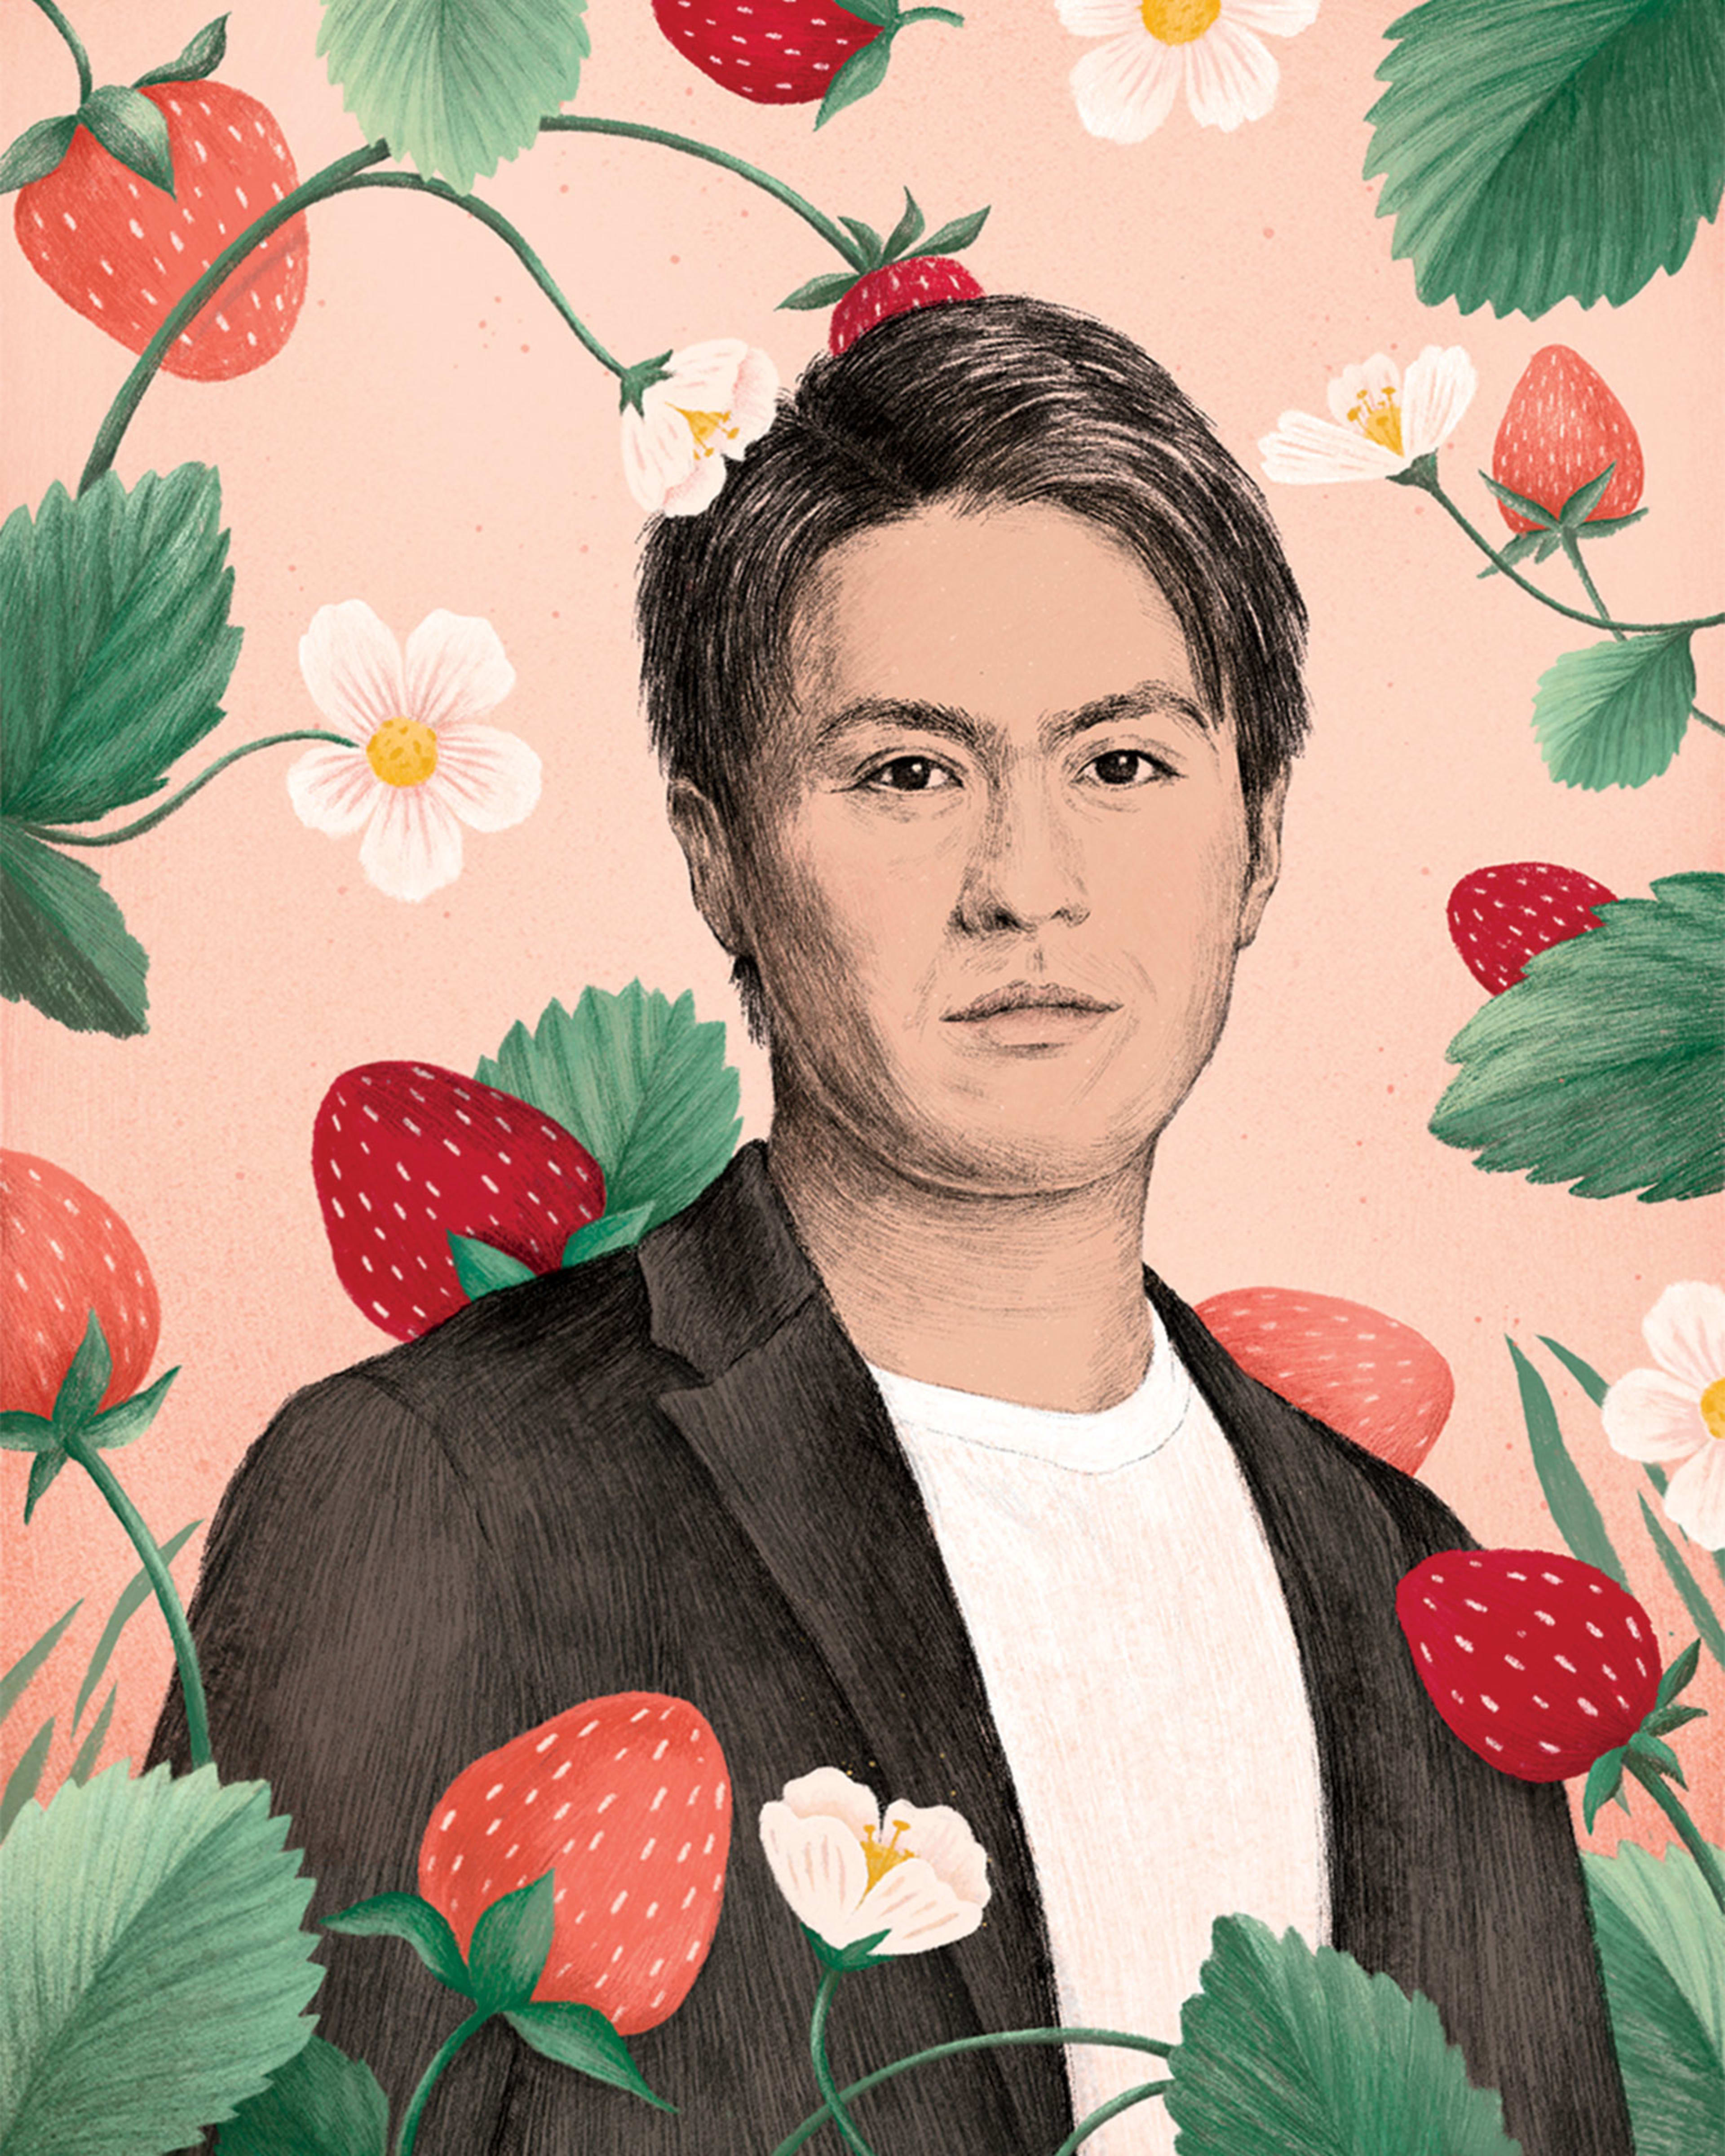 The career and productivity secrets of America’s genius strawberry grower